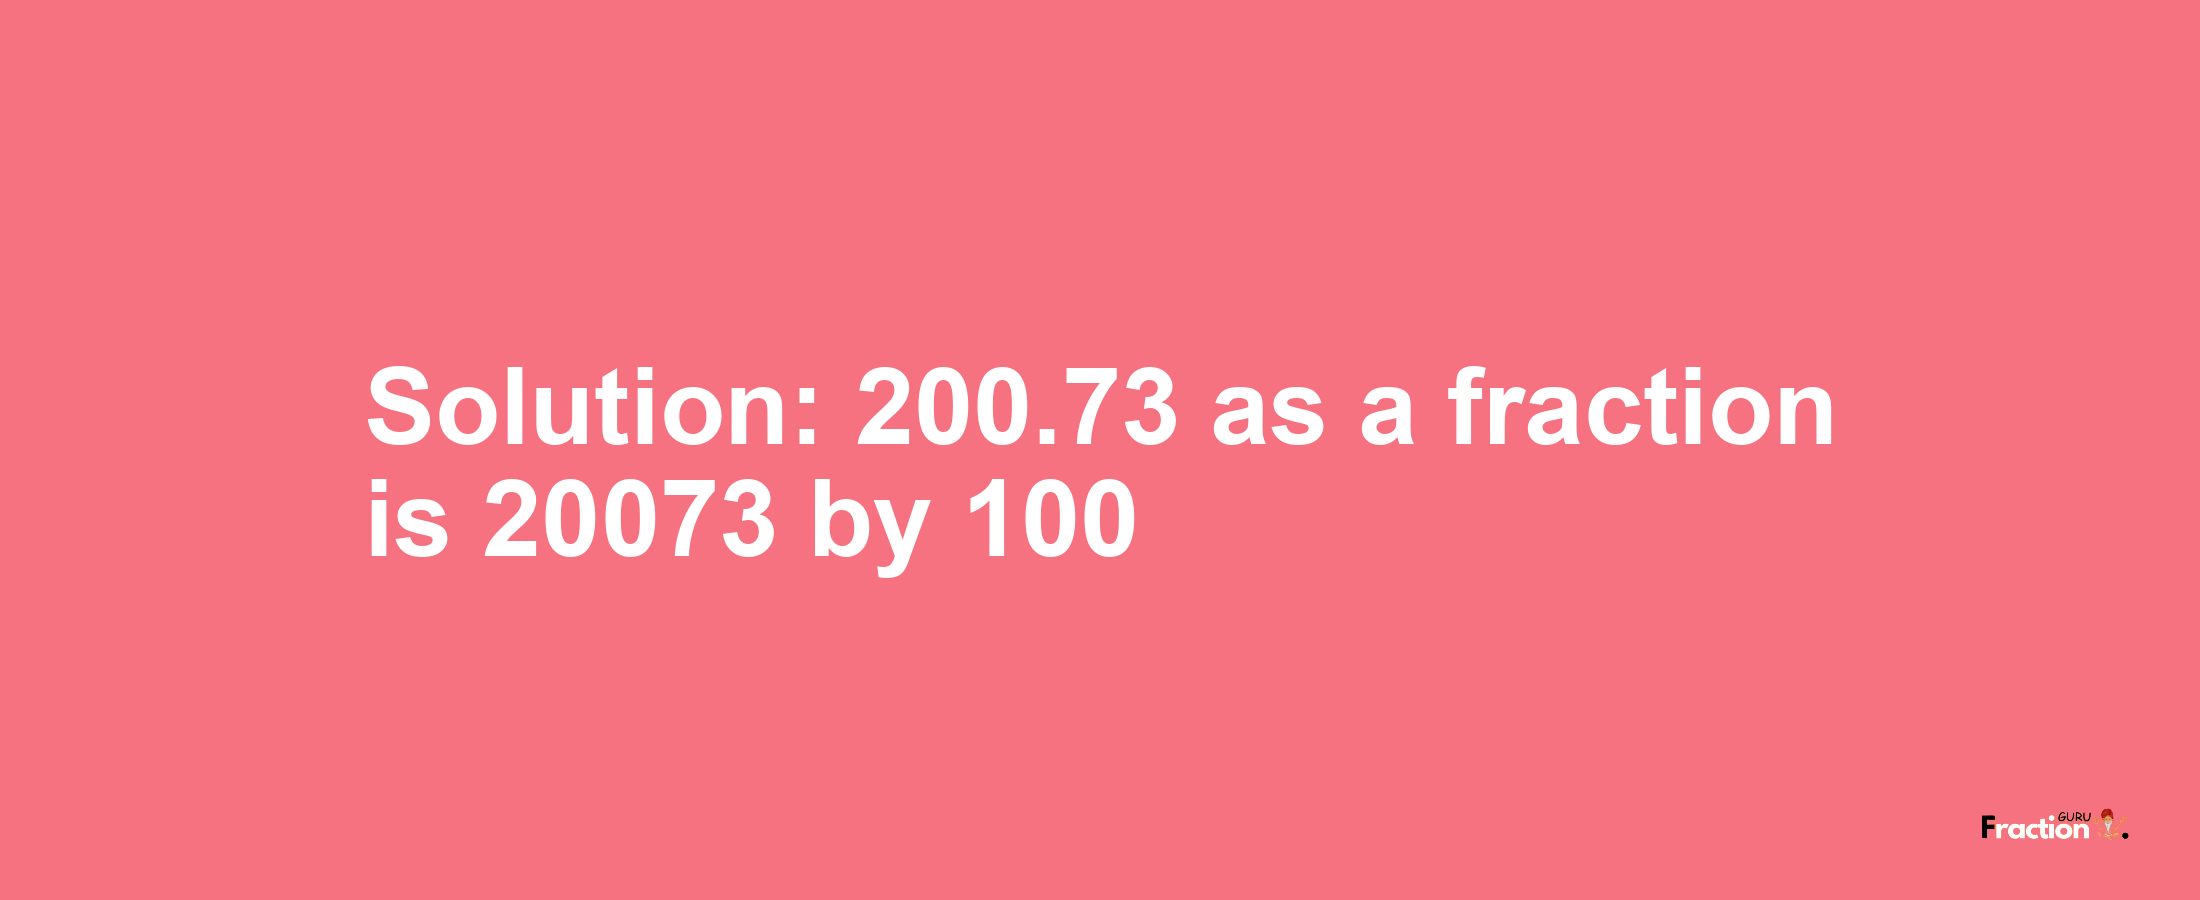 Solution:200.73 as a fraction is 20073/100